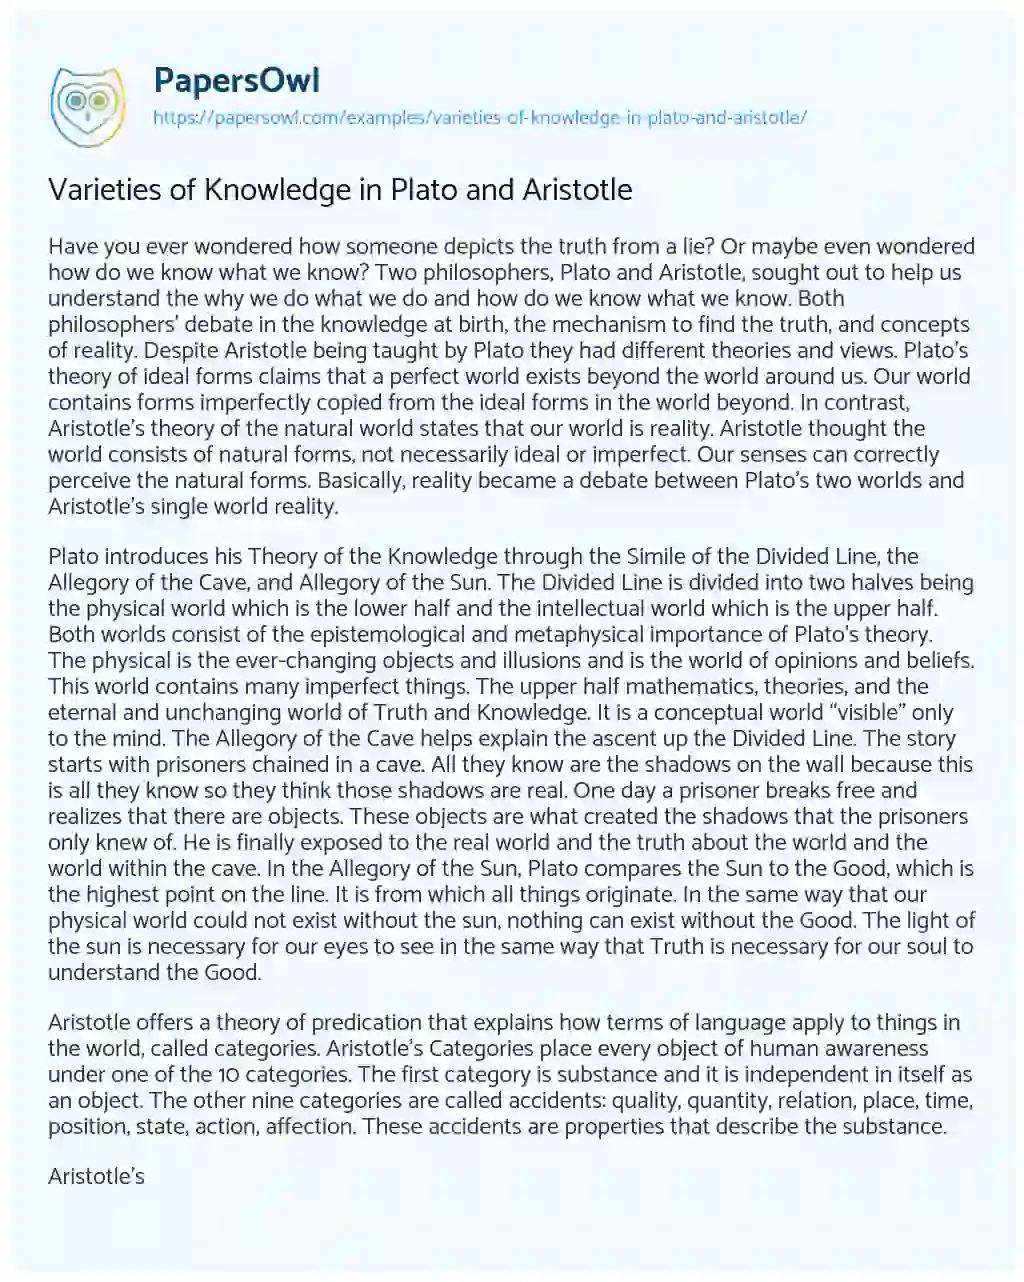 Varieties of Knowledge in Plato and Aristotle essay